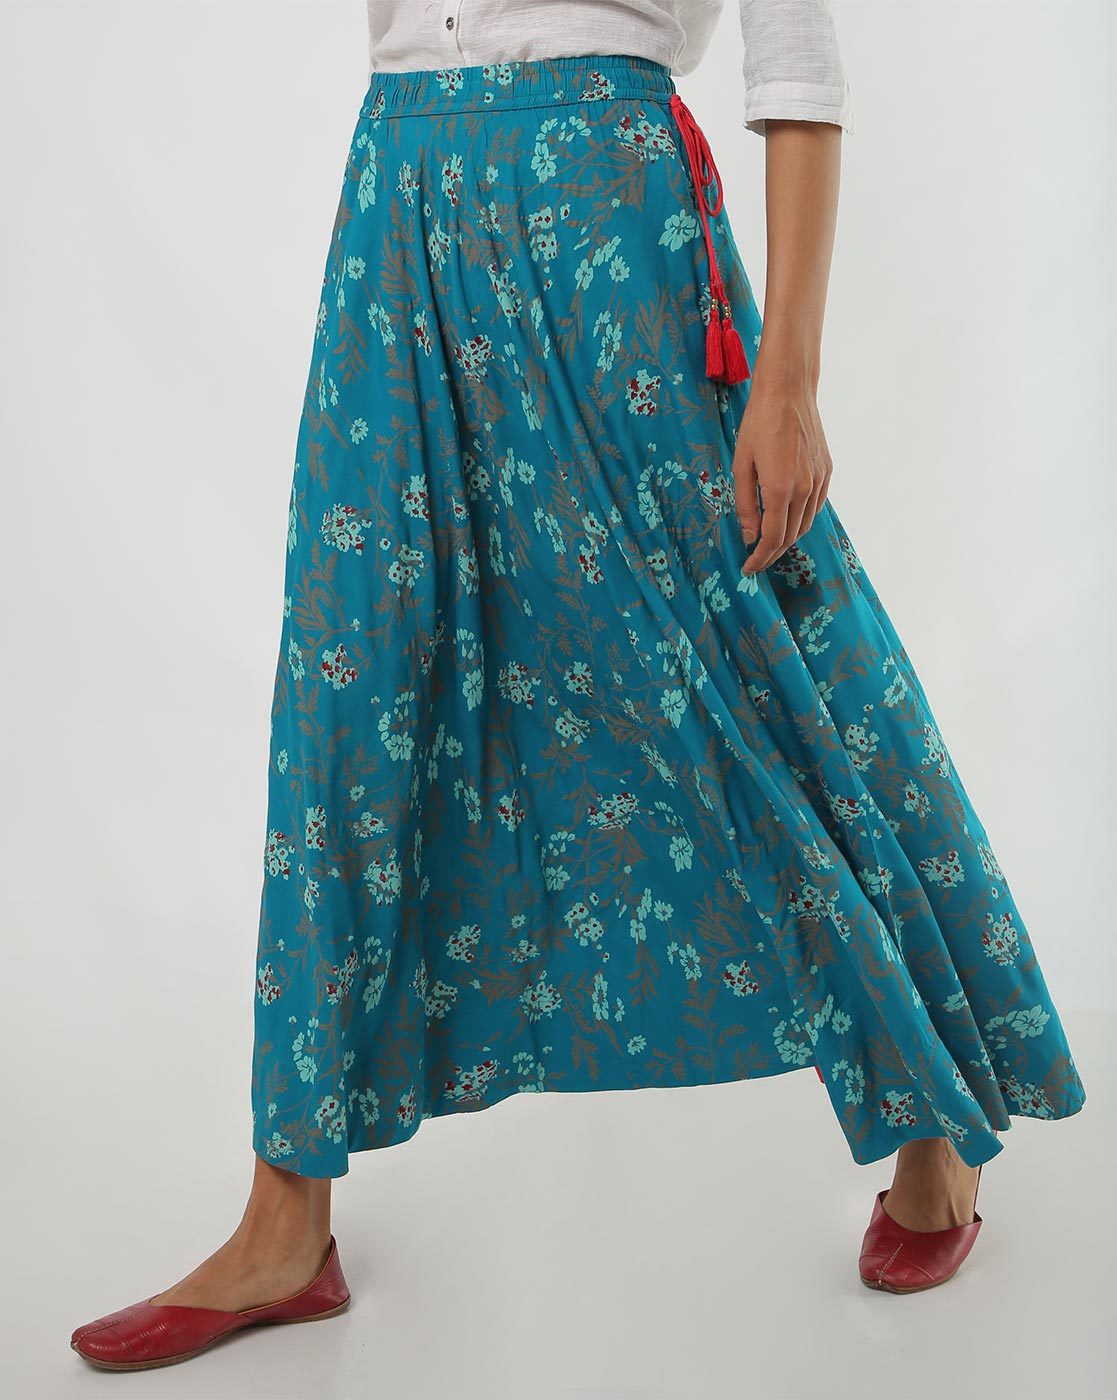 Buy Turquoise Blue Skirts & Ghagras for Women by AVAASA MIX N 